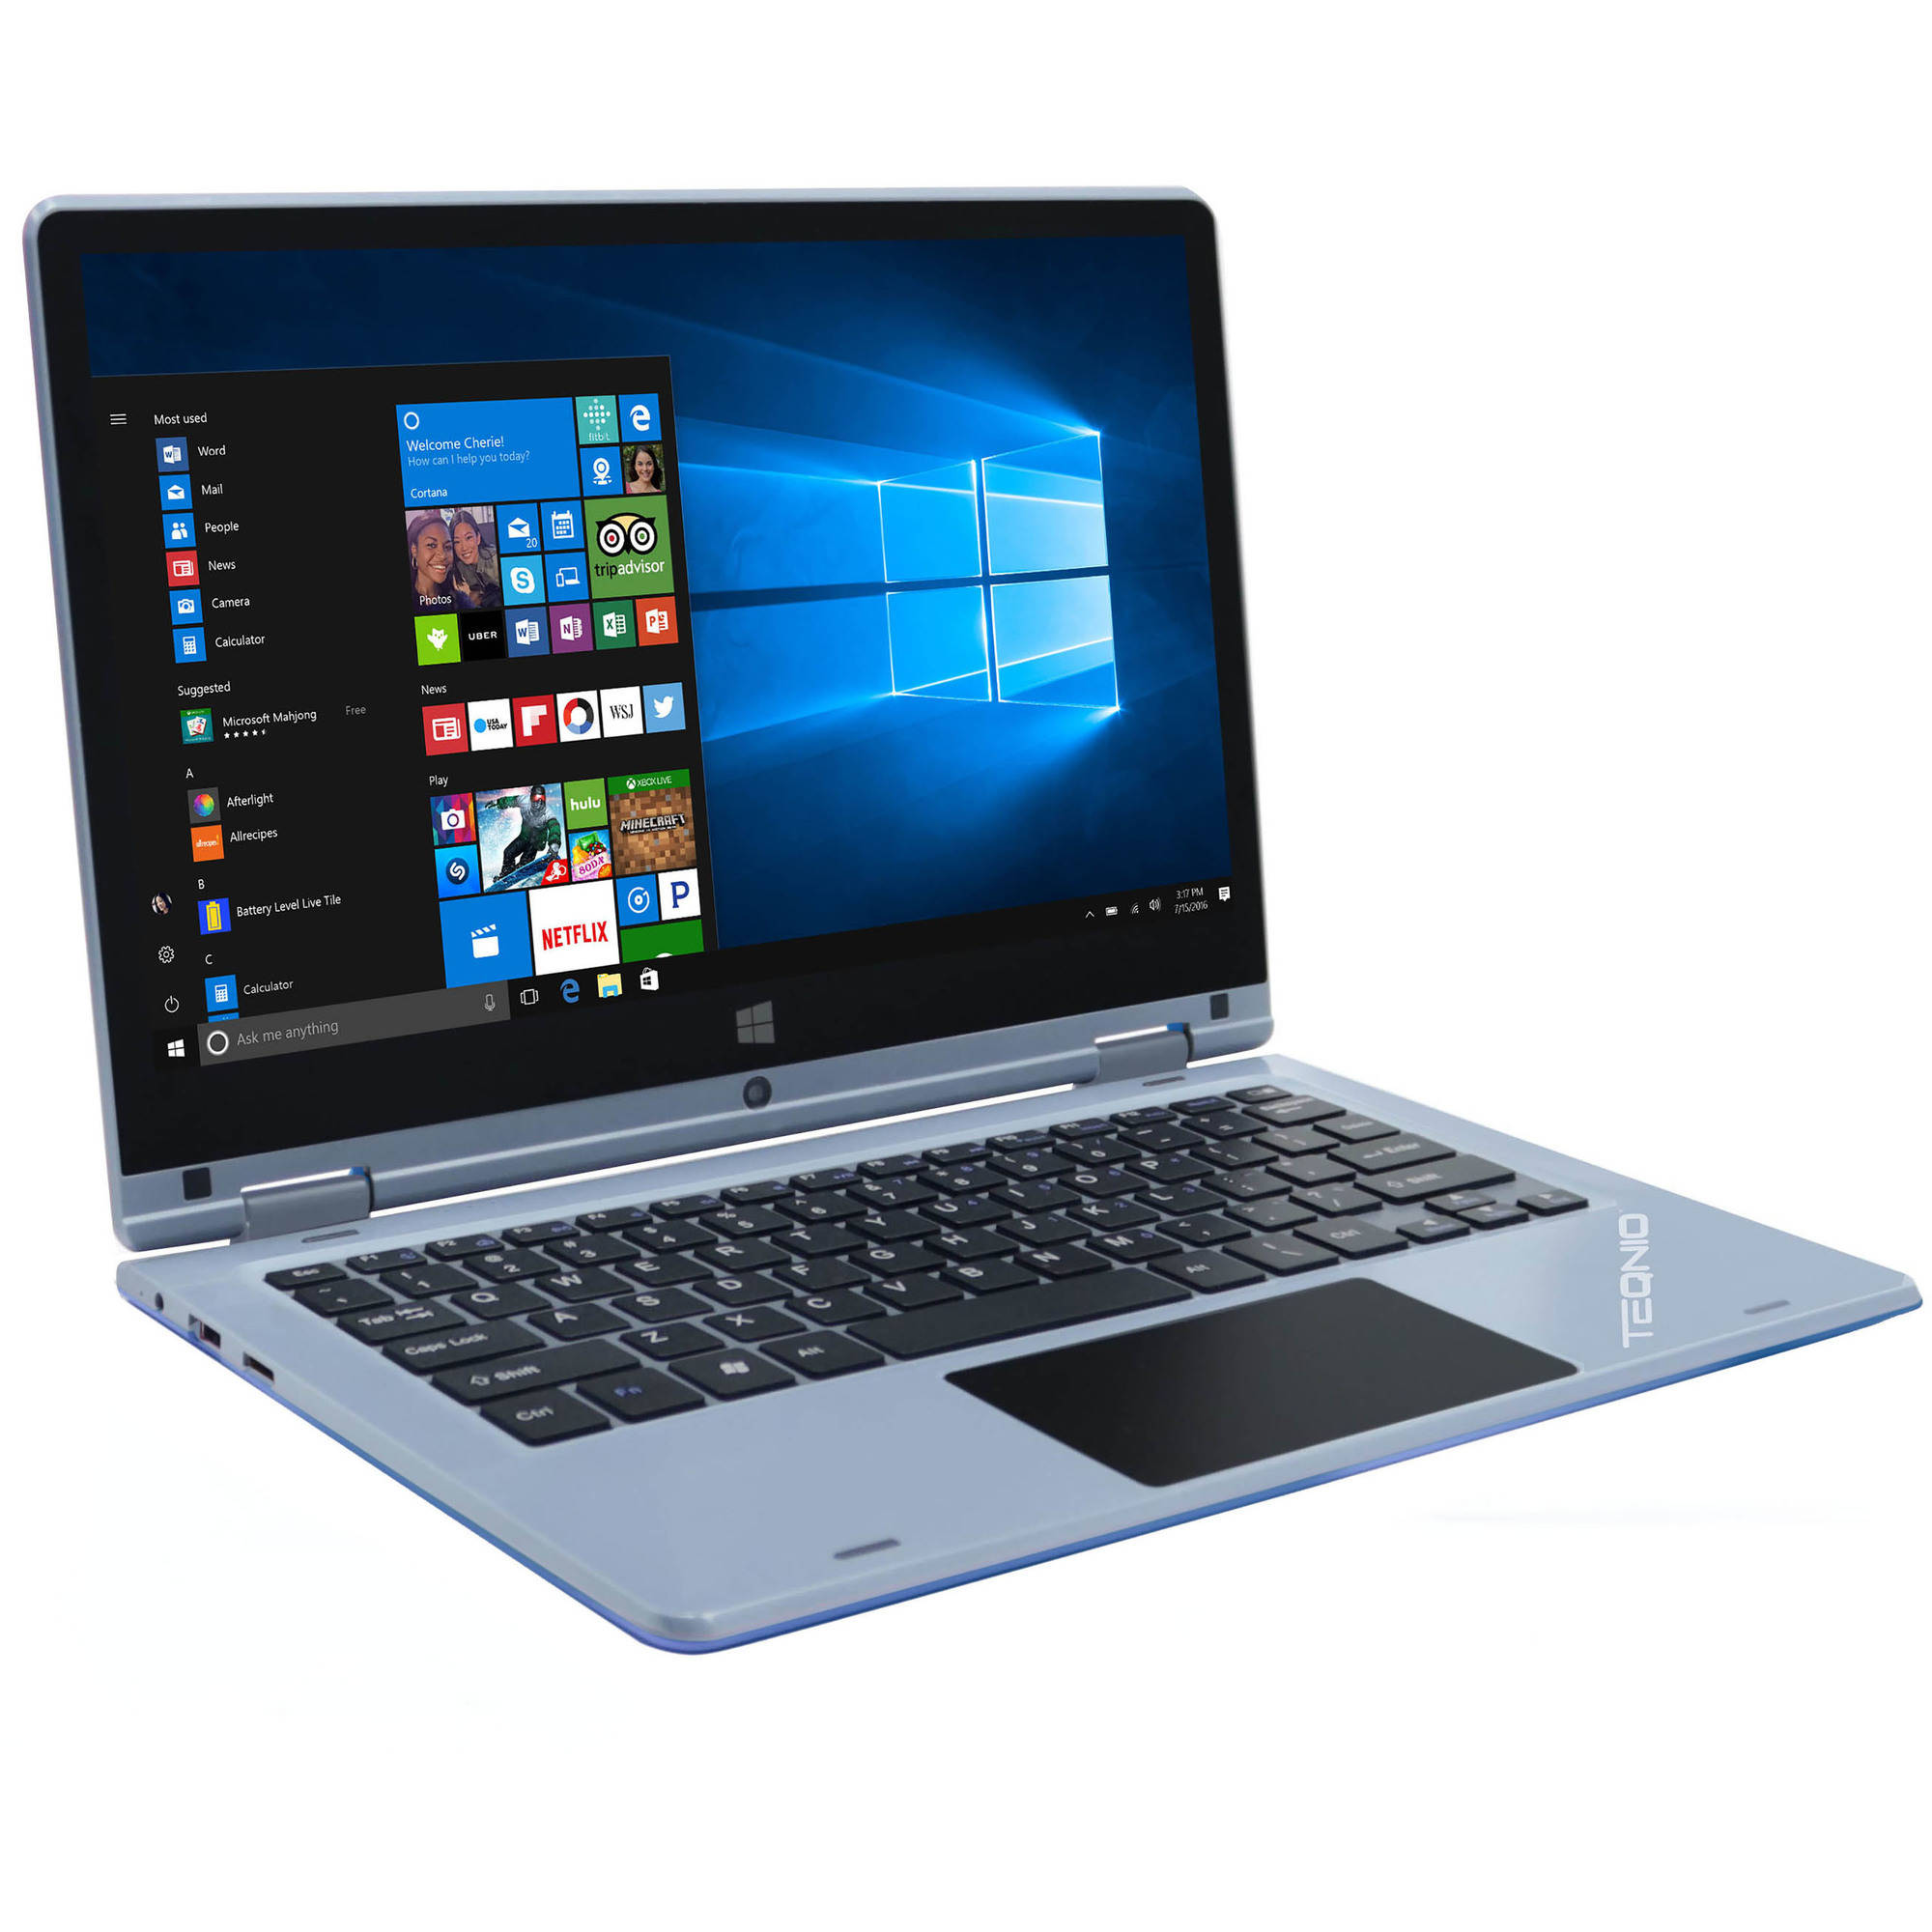 11.6″ 2-in-1 touchscreen Windows 10 laptop for $119